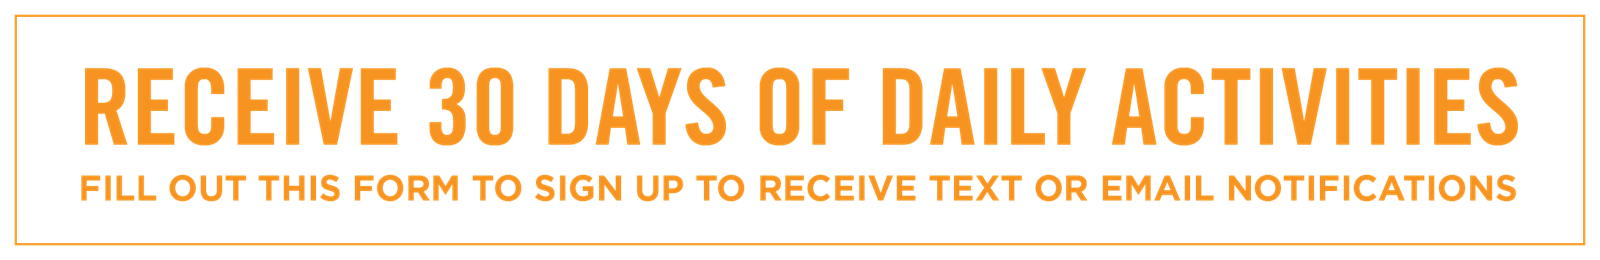 Receive 30 Days of Daily Activities - Fill Out This Form To Sign Up To Receive Text Or Email Notifications